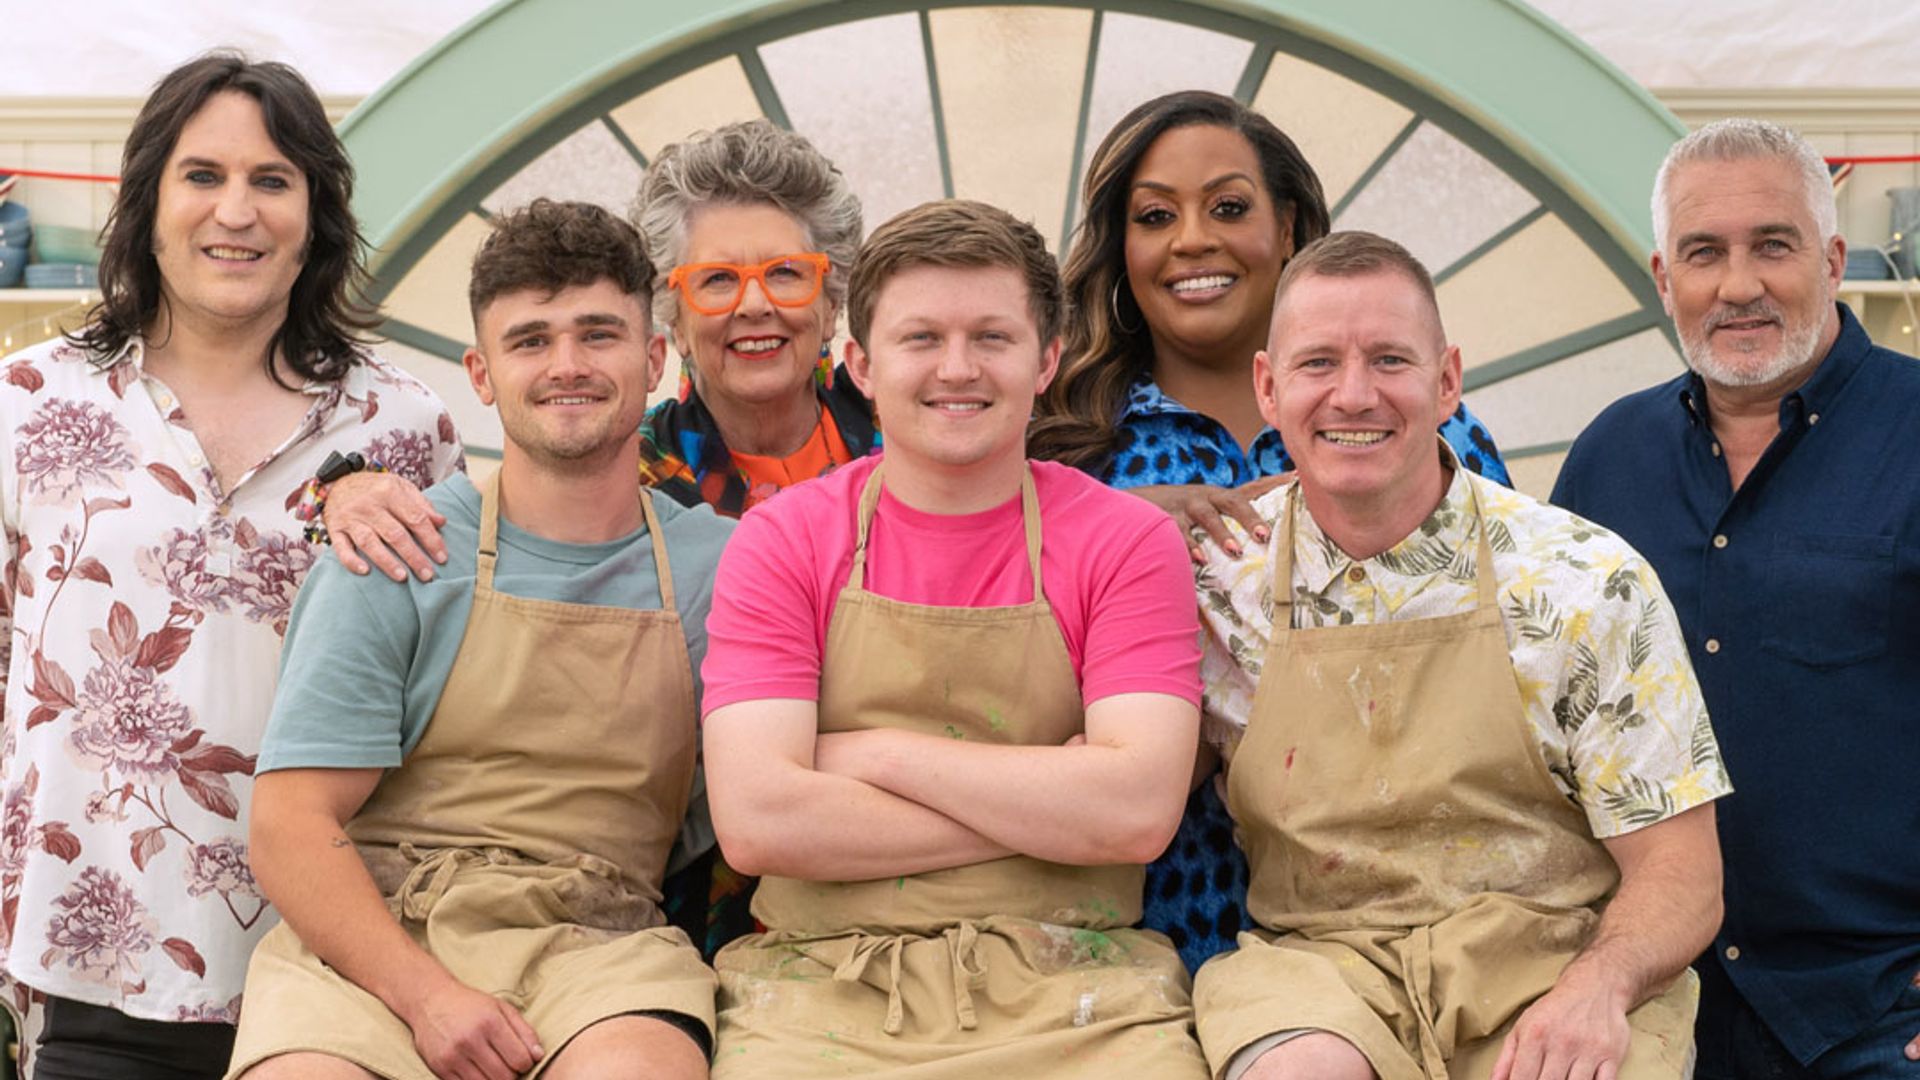 Bake Off 2023 finalists Matty, Josh and Dan with judges and hosts